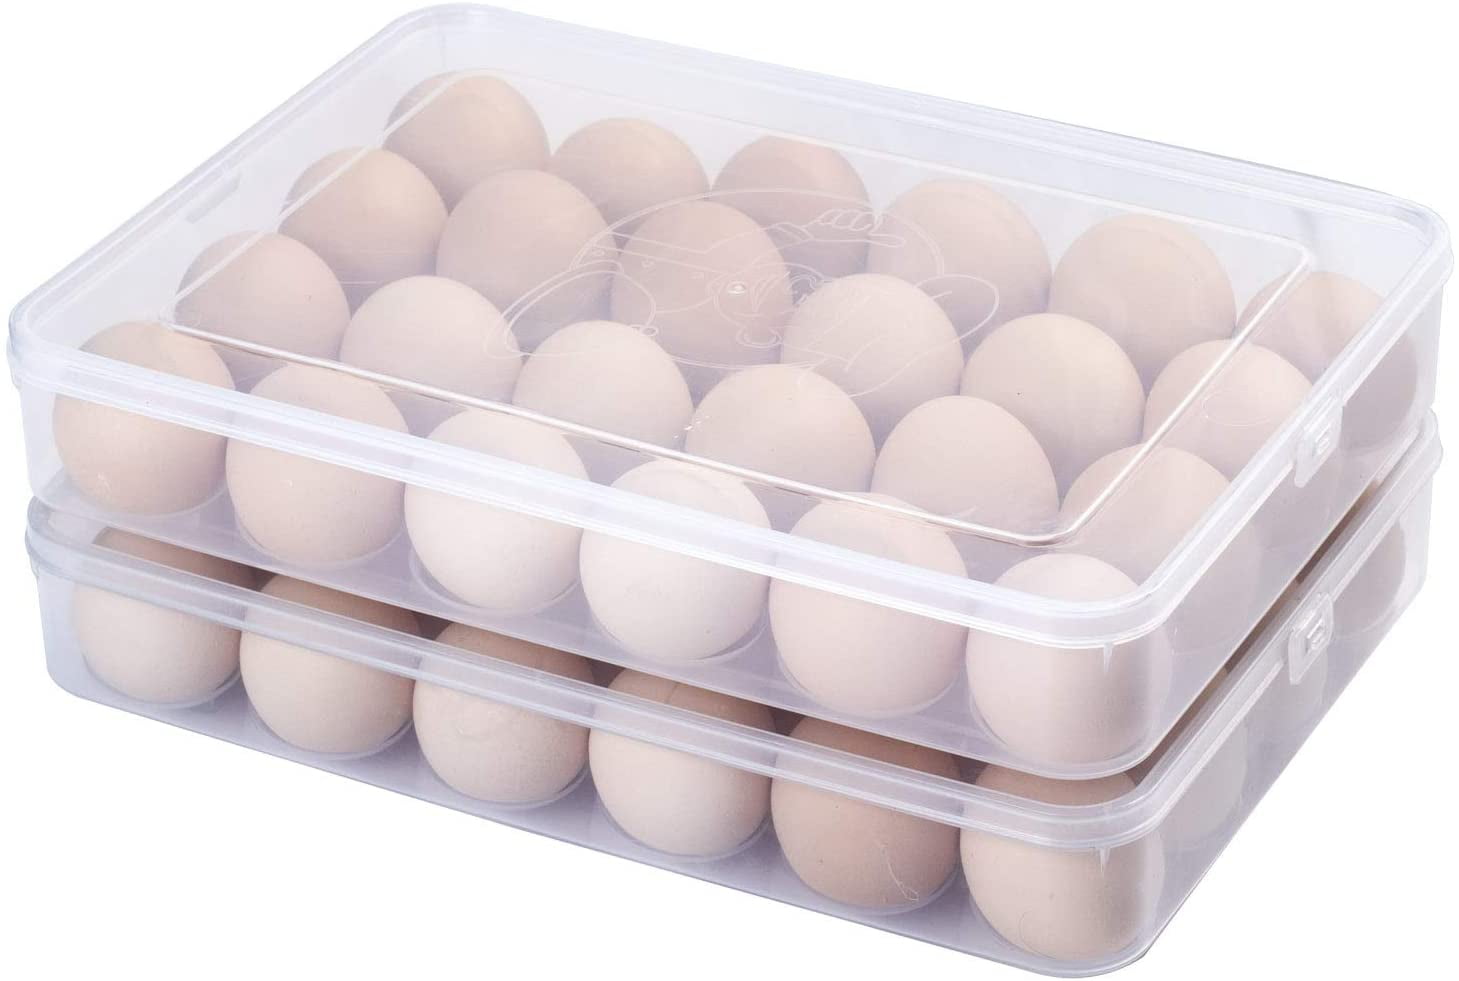 Refrigerator Egg Container Organizer Stackable Clear Plastic Egg Cartons Egg Tray Egg Storage Box with Dust-Proof a Lid and Handle 24 Grid Egg Holder Suitable for Freezer Pantry Camping 